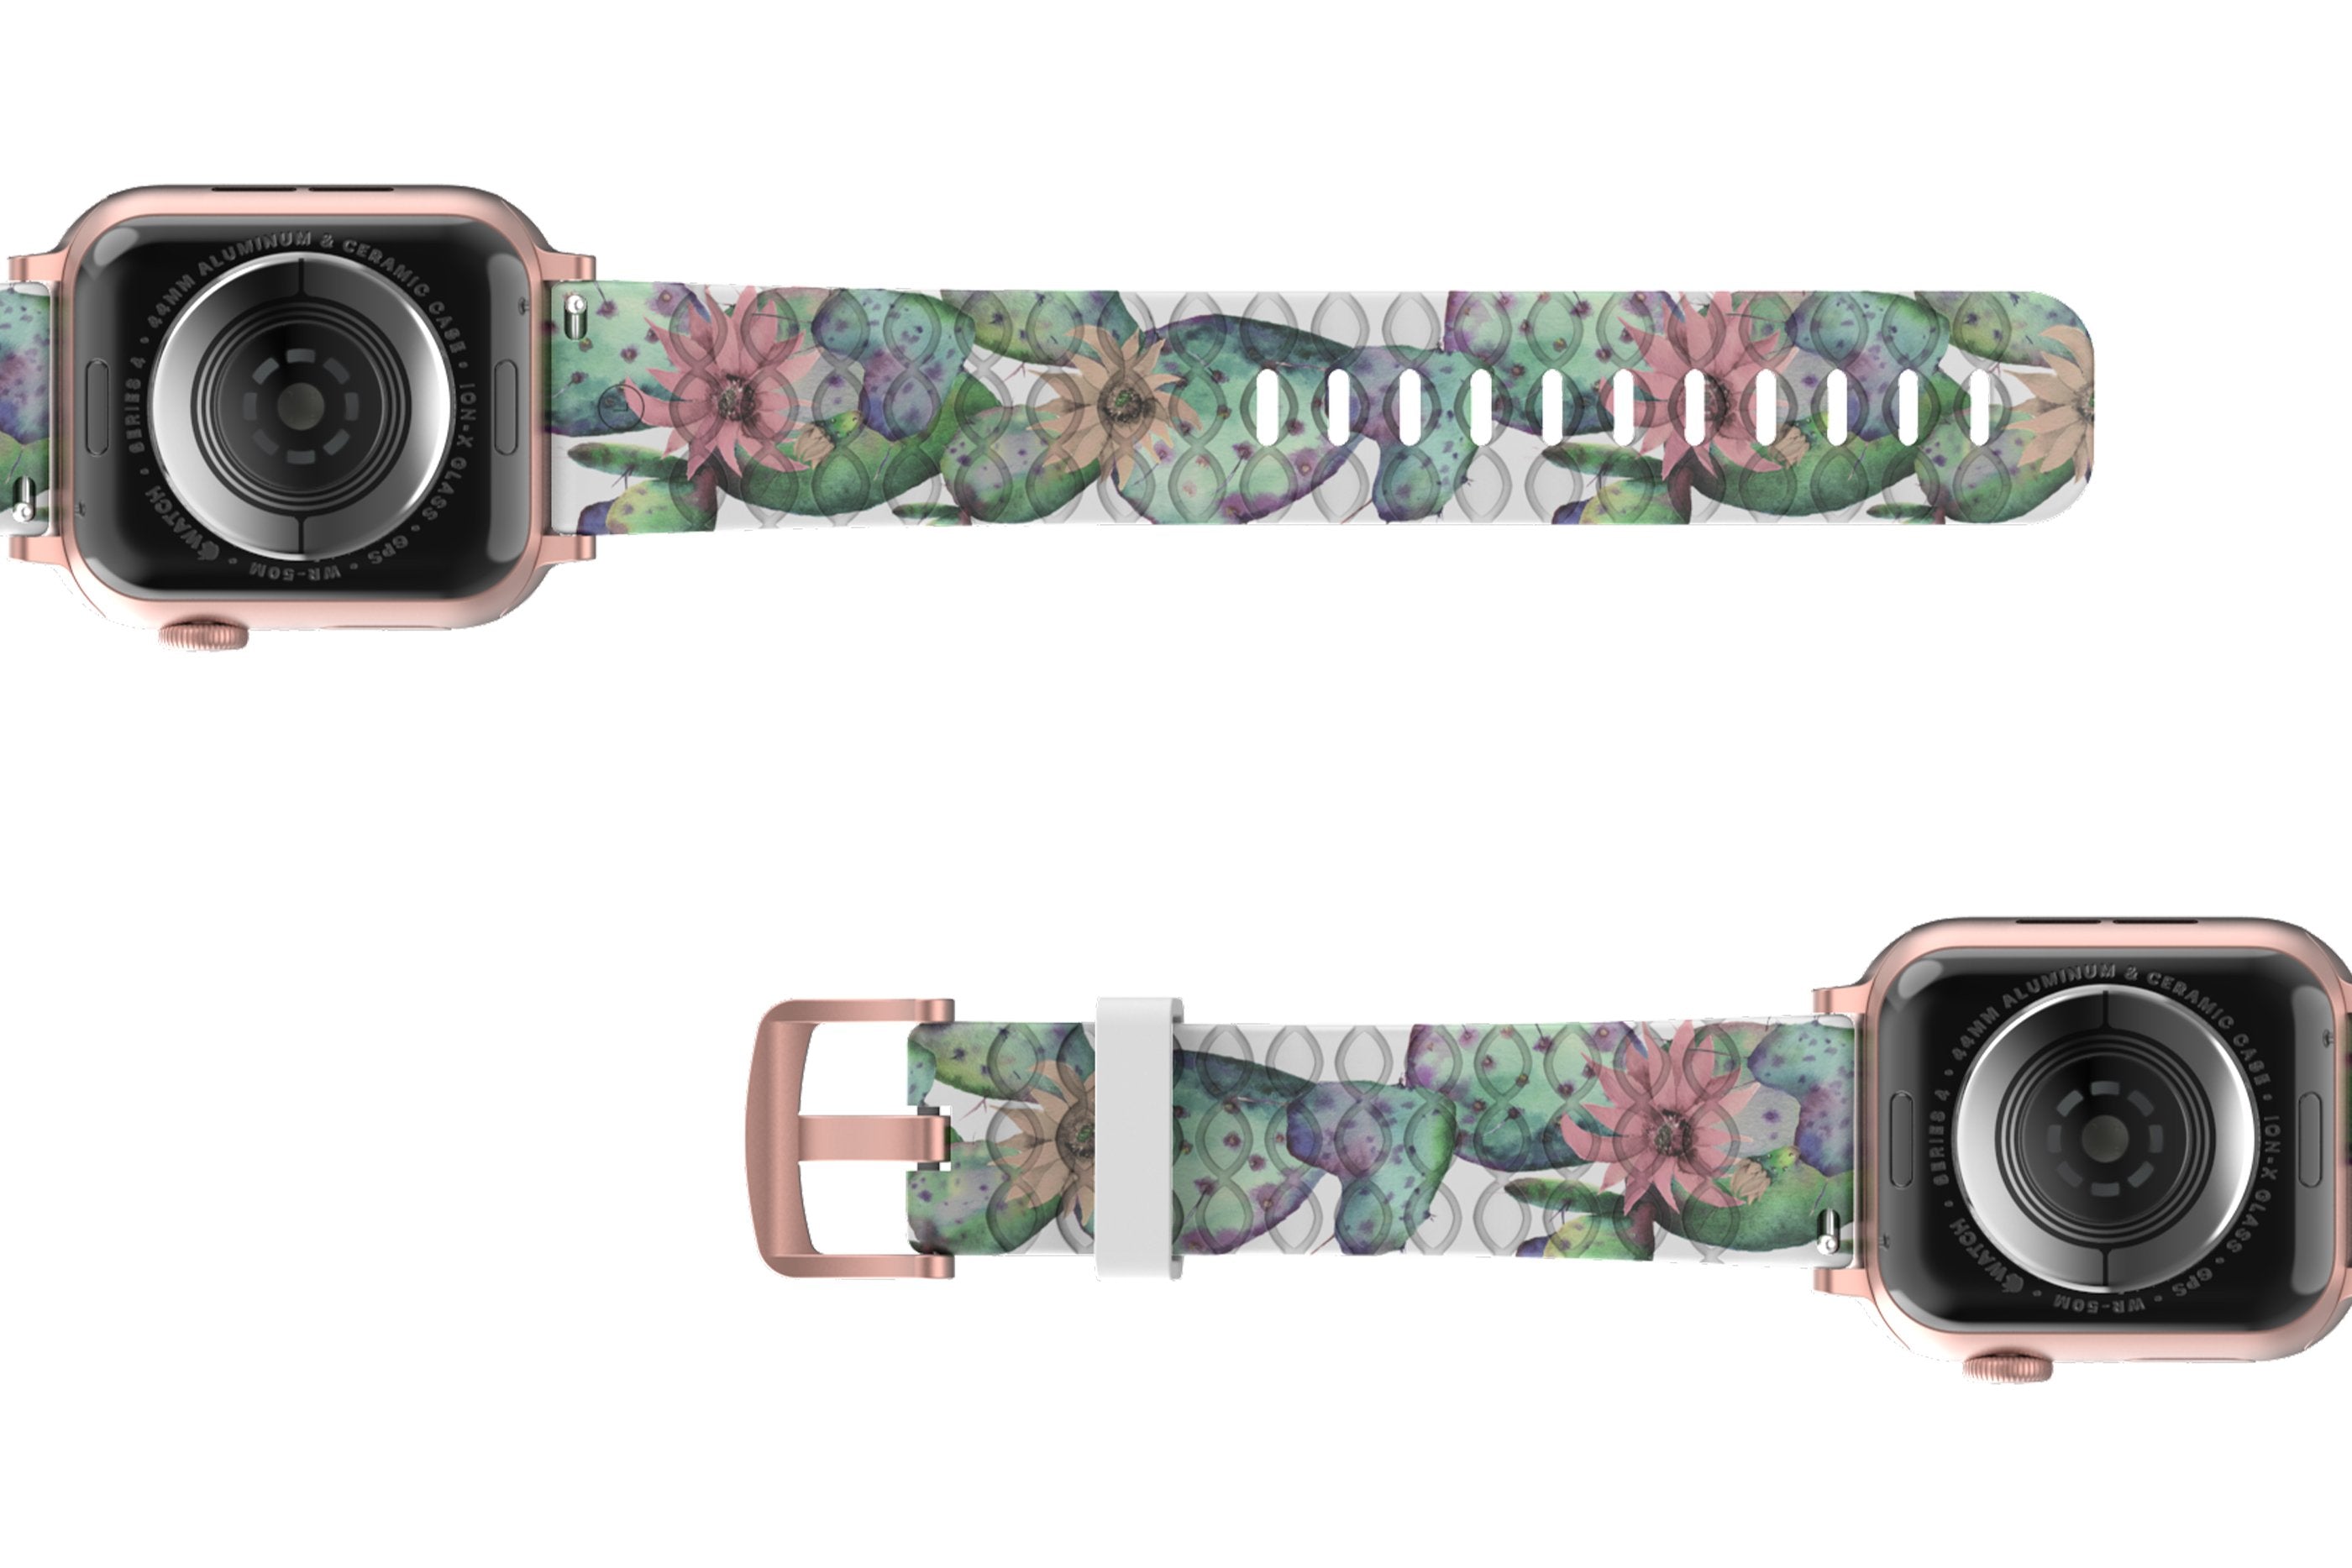 Cactus Bloom Apple Watch Band with rose gold hardware viewed bottom up